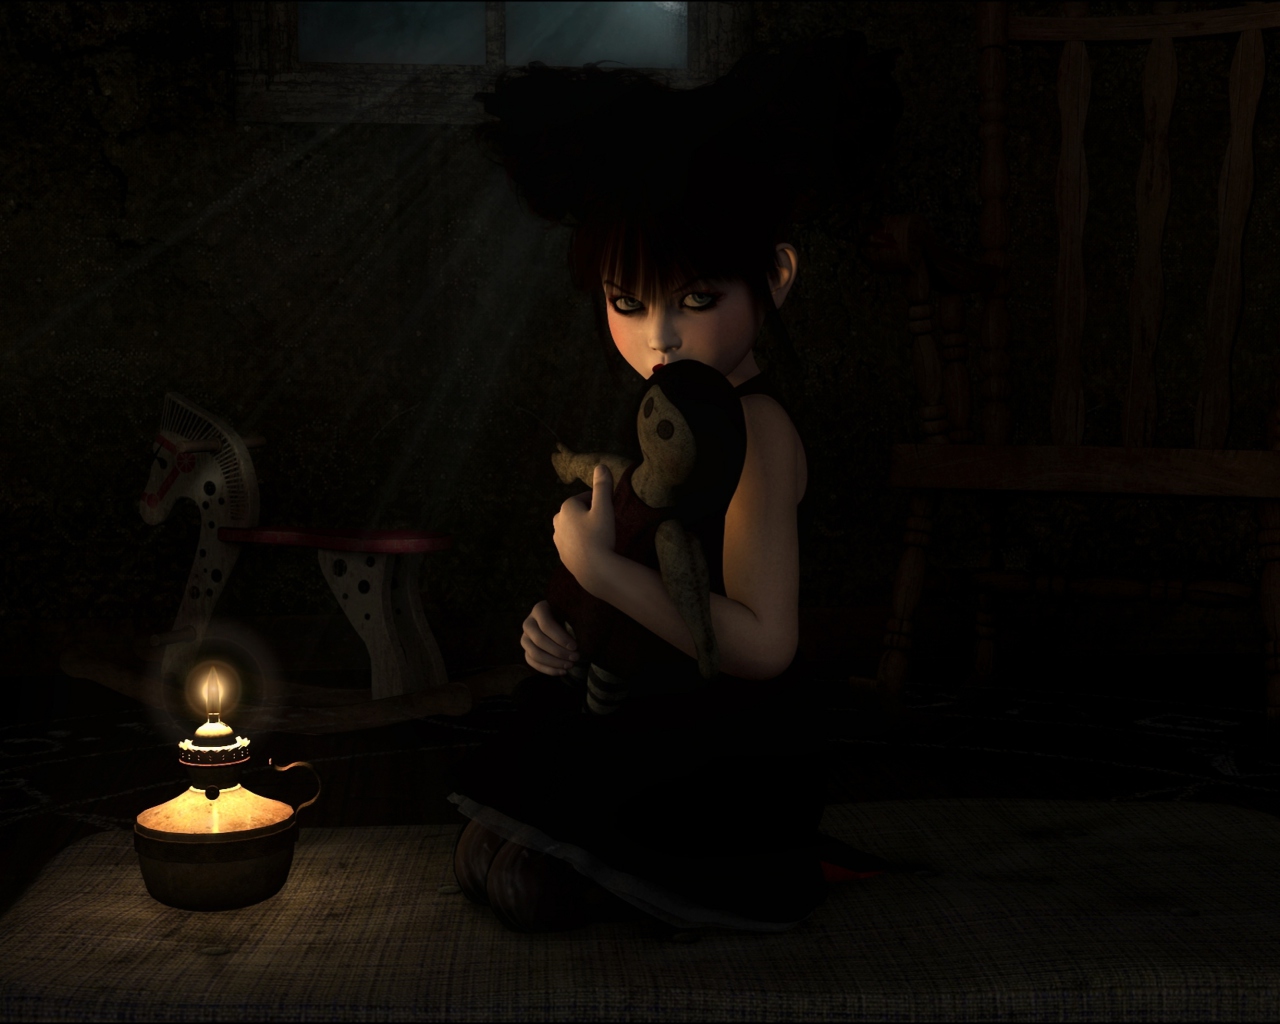 Das Lonely Child With Toy Wallpaper 1280x1024